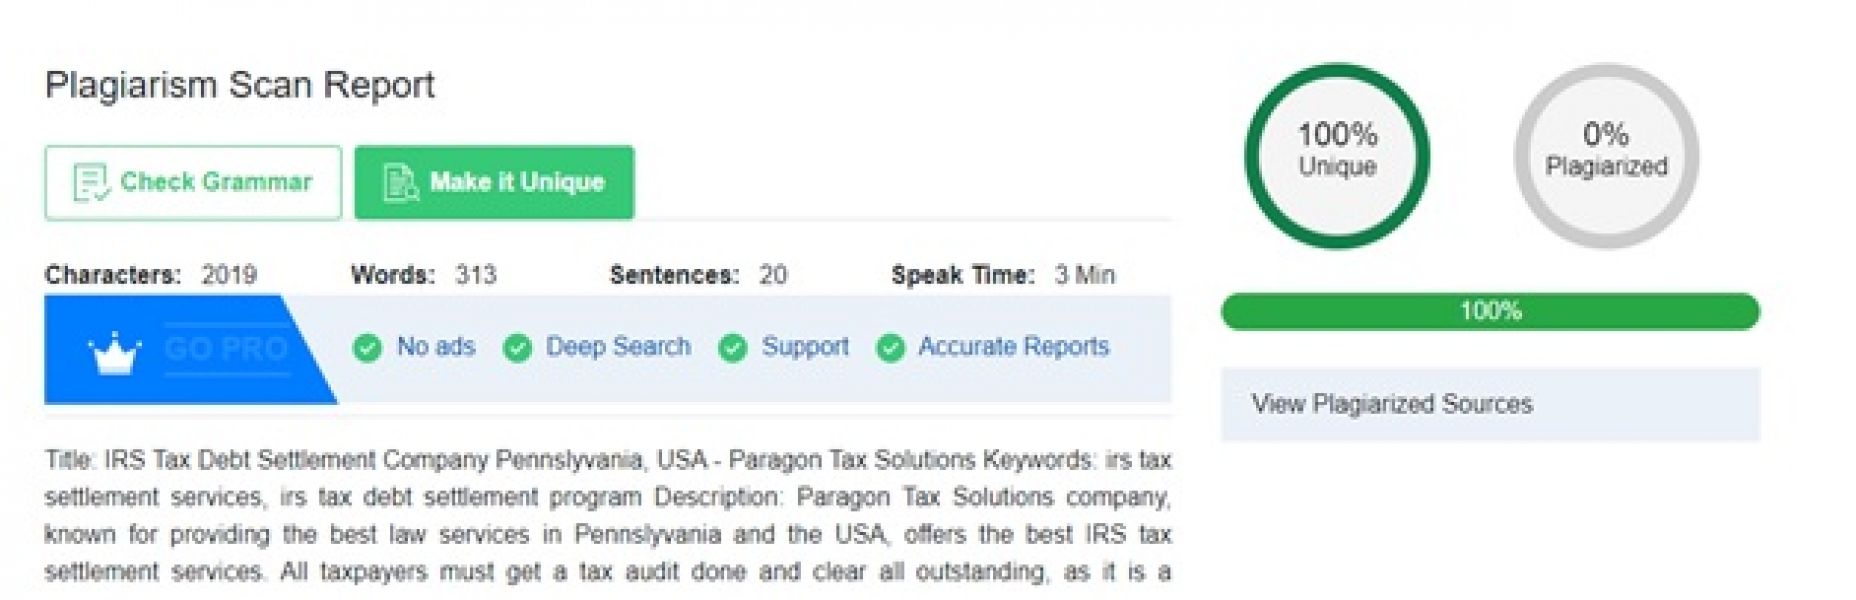 IRS Tax Debt Settlement Company Pennslyvania, USA - Paragon Tax Solutions 